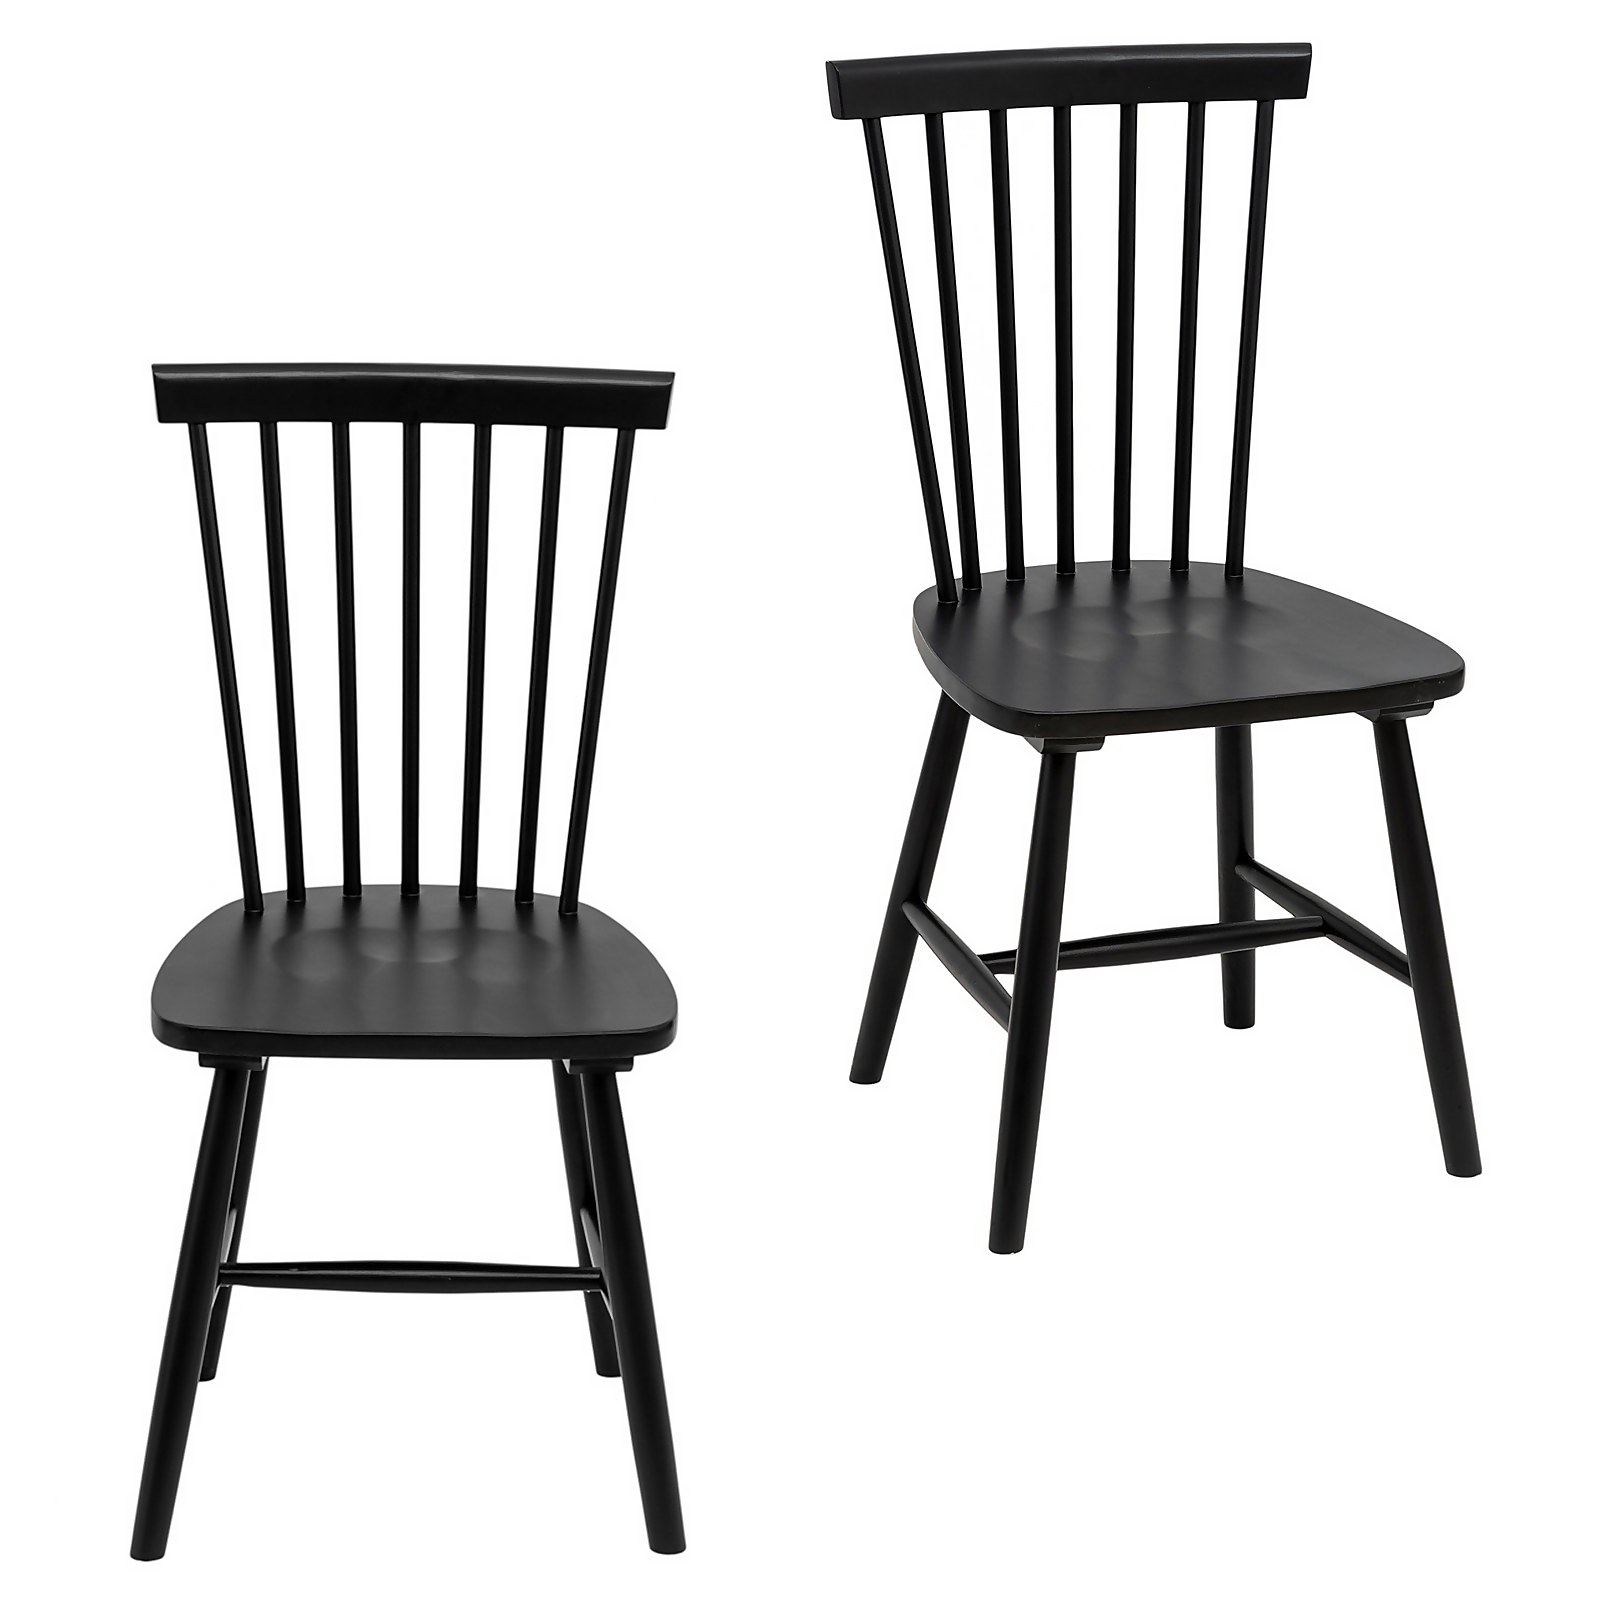 Photo of The Spindle Chair - Set Of 2 - Black